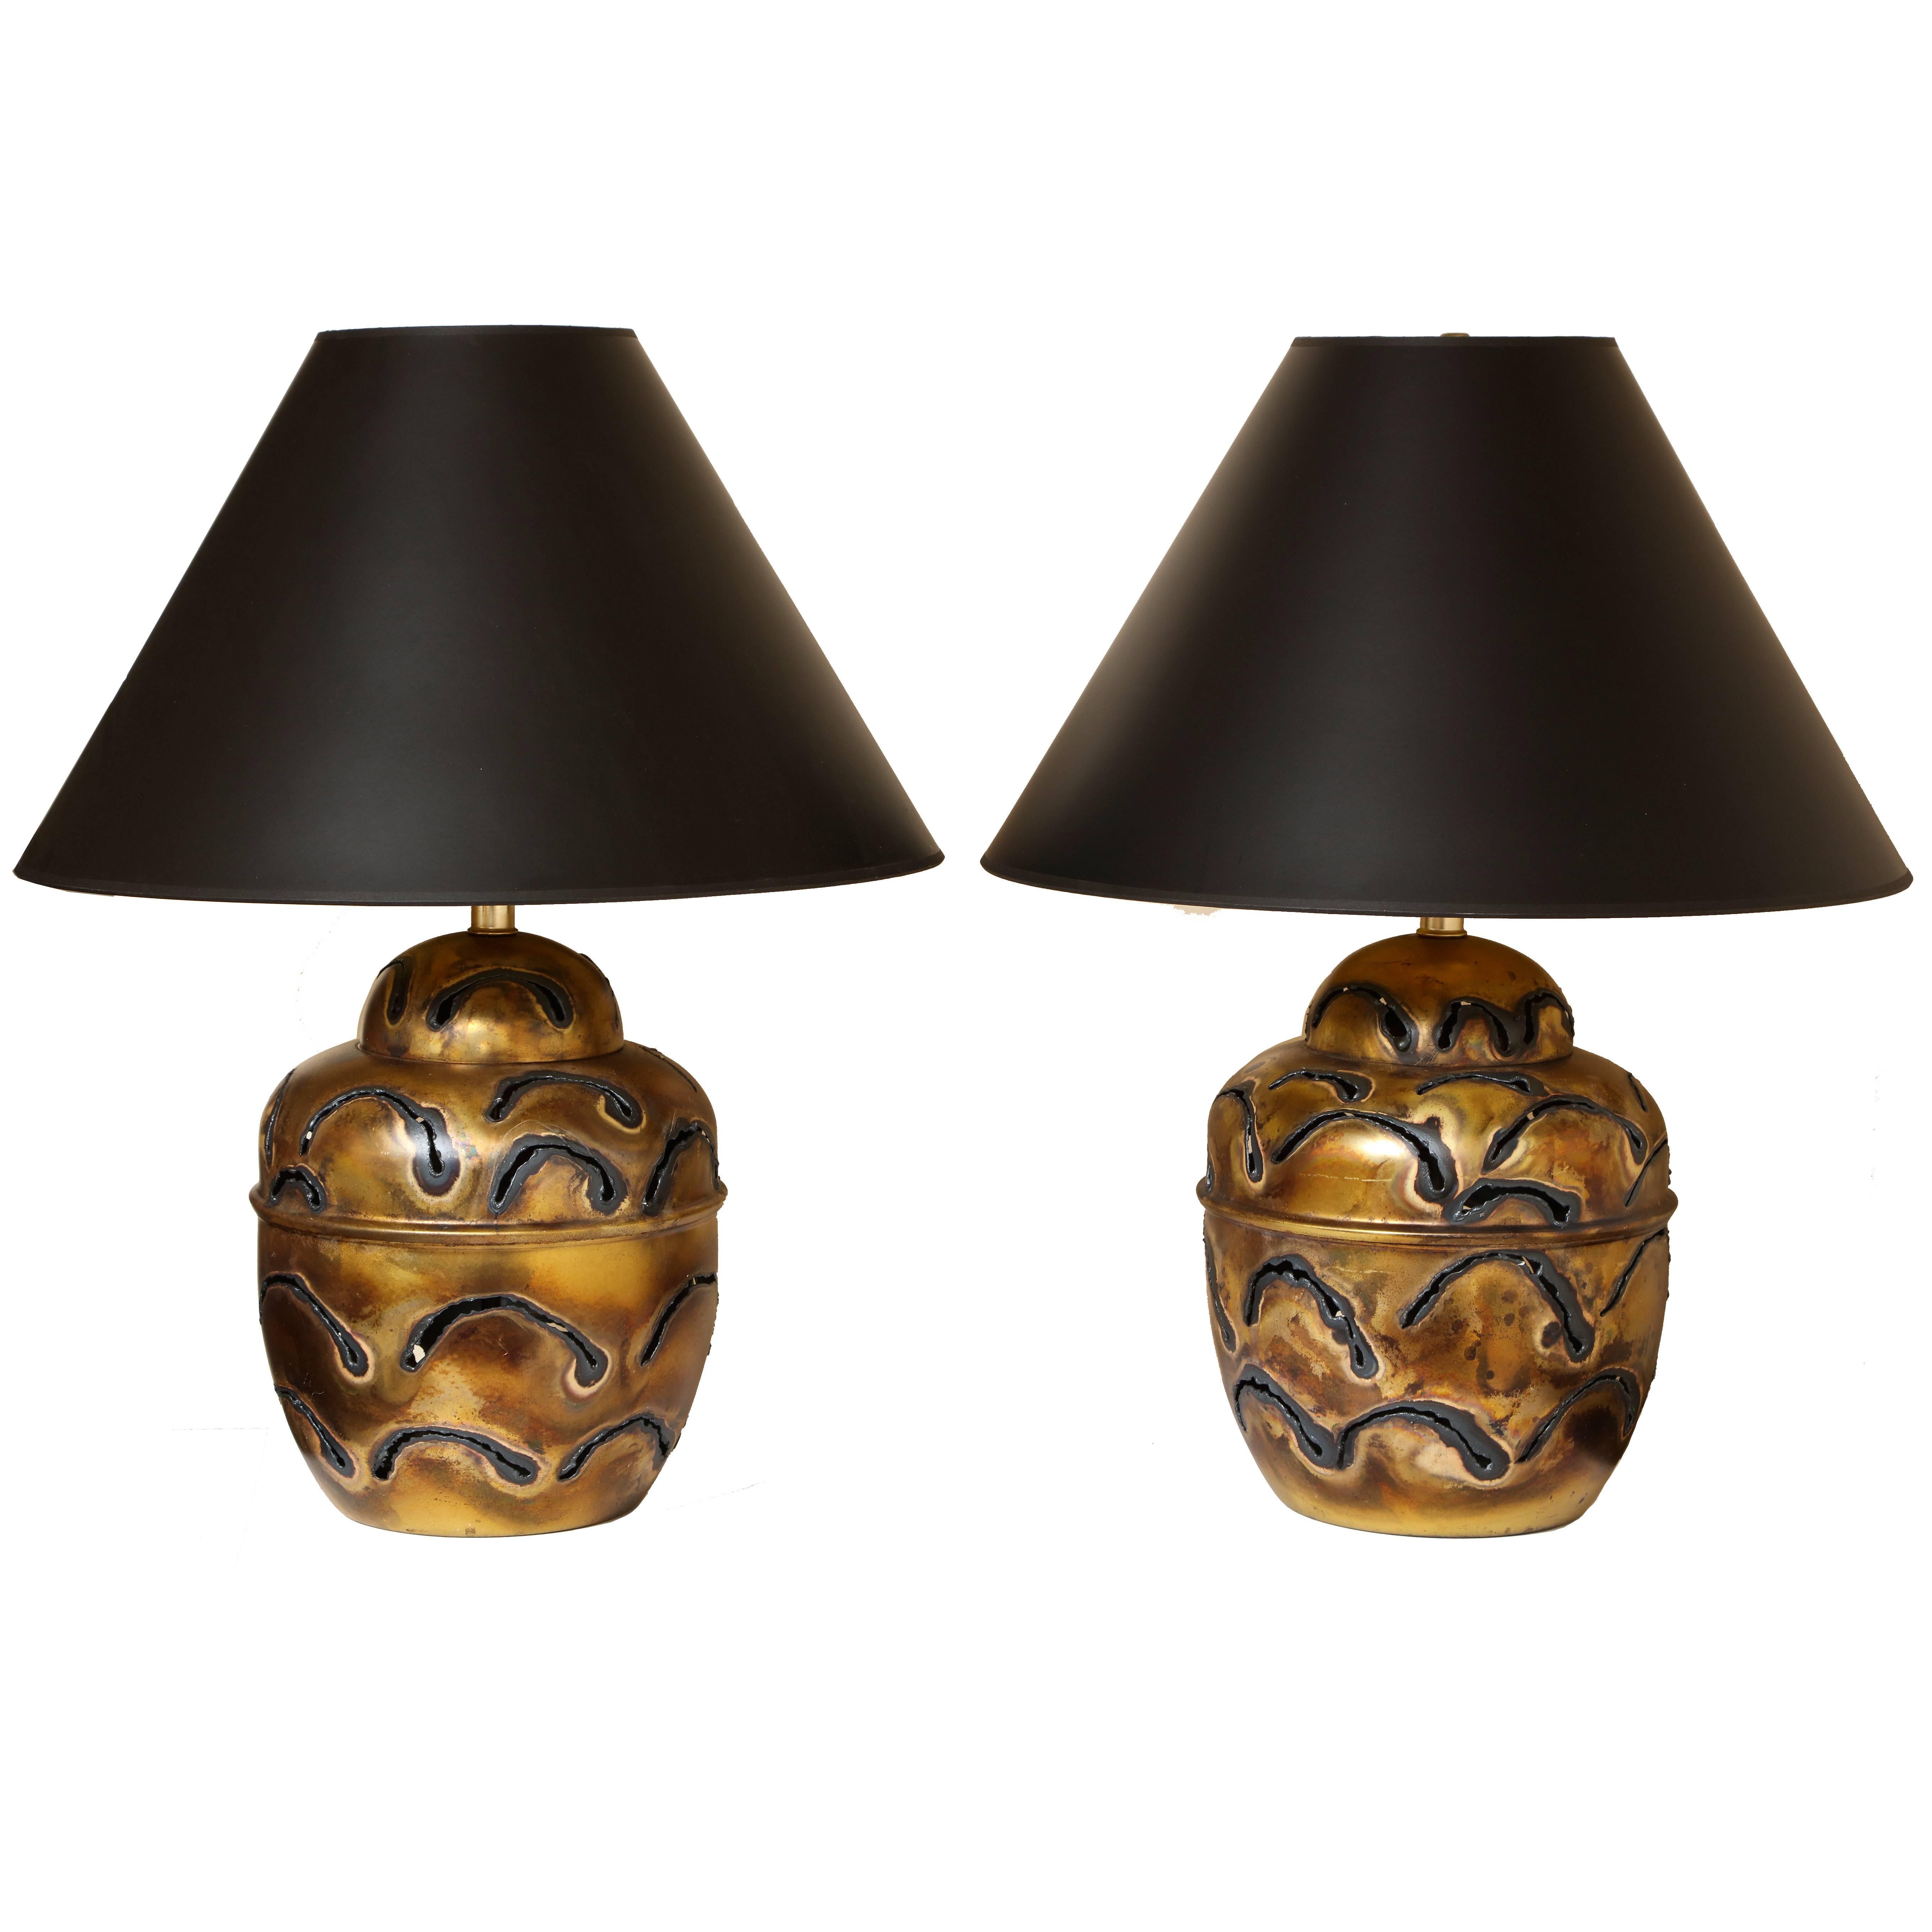 Pair of Ginger Jar Form Brutalist Welded Metal Table Lamps with Pierced Design